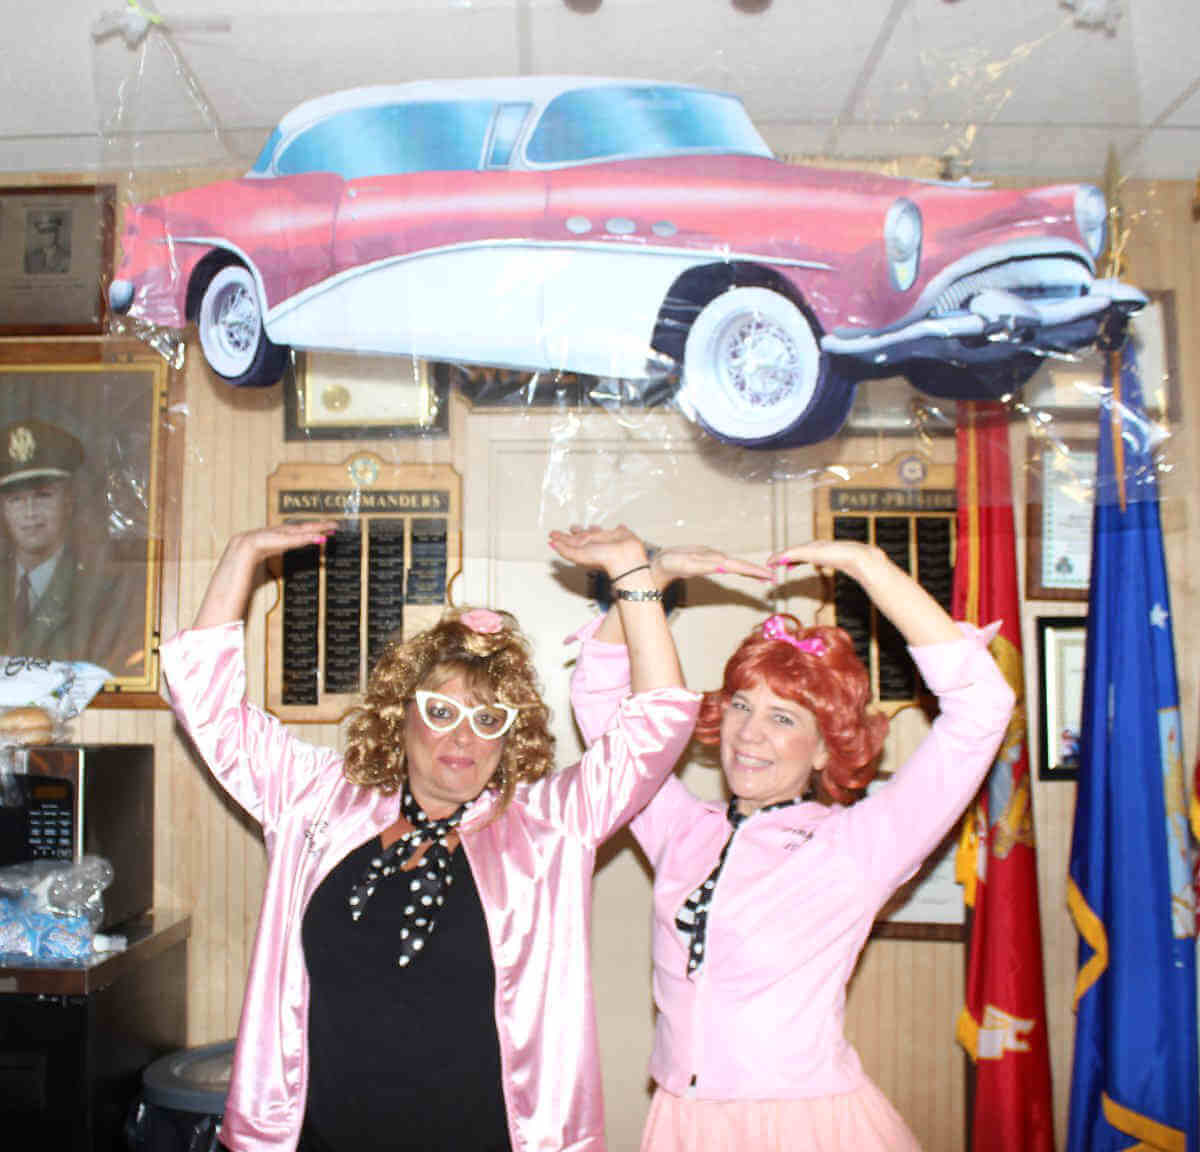 Post 1456’s Support Our Troops Sock Hop